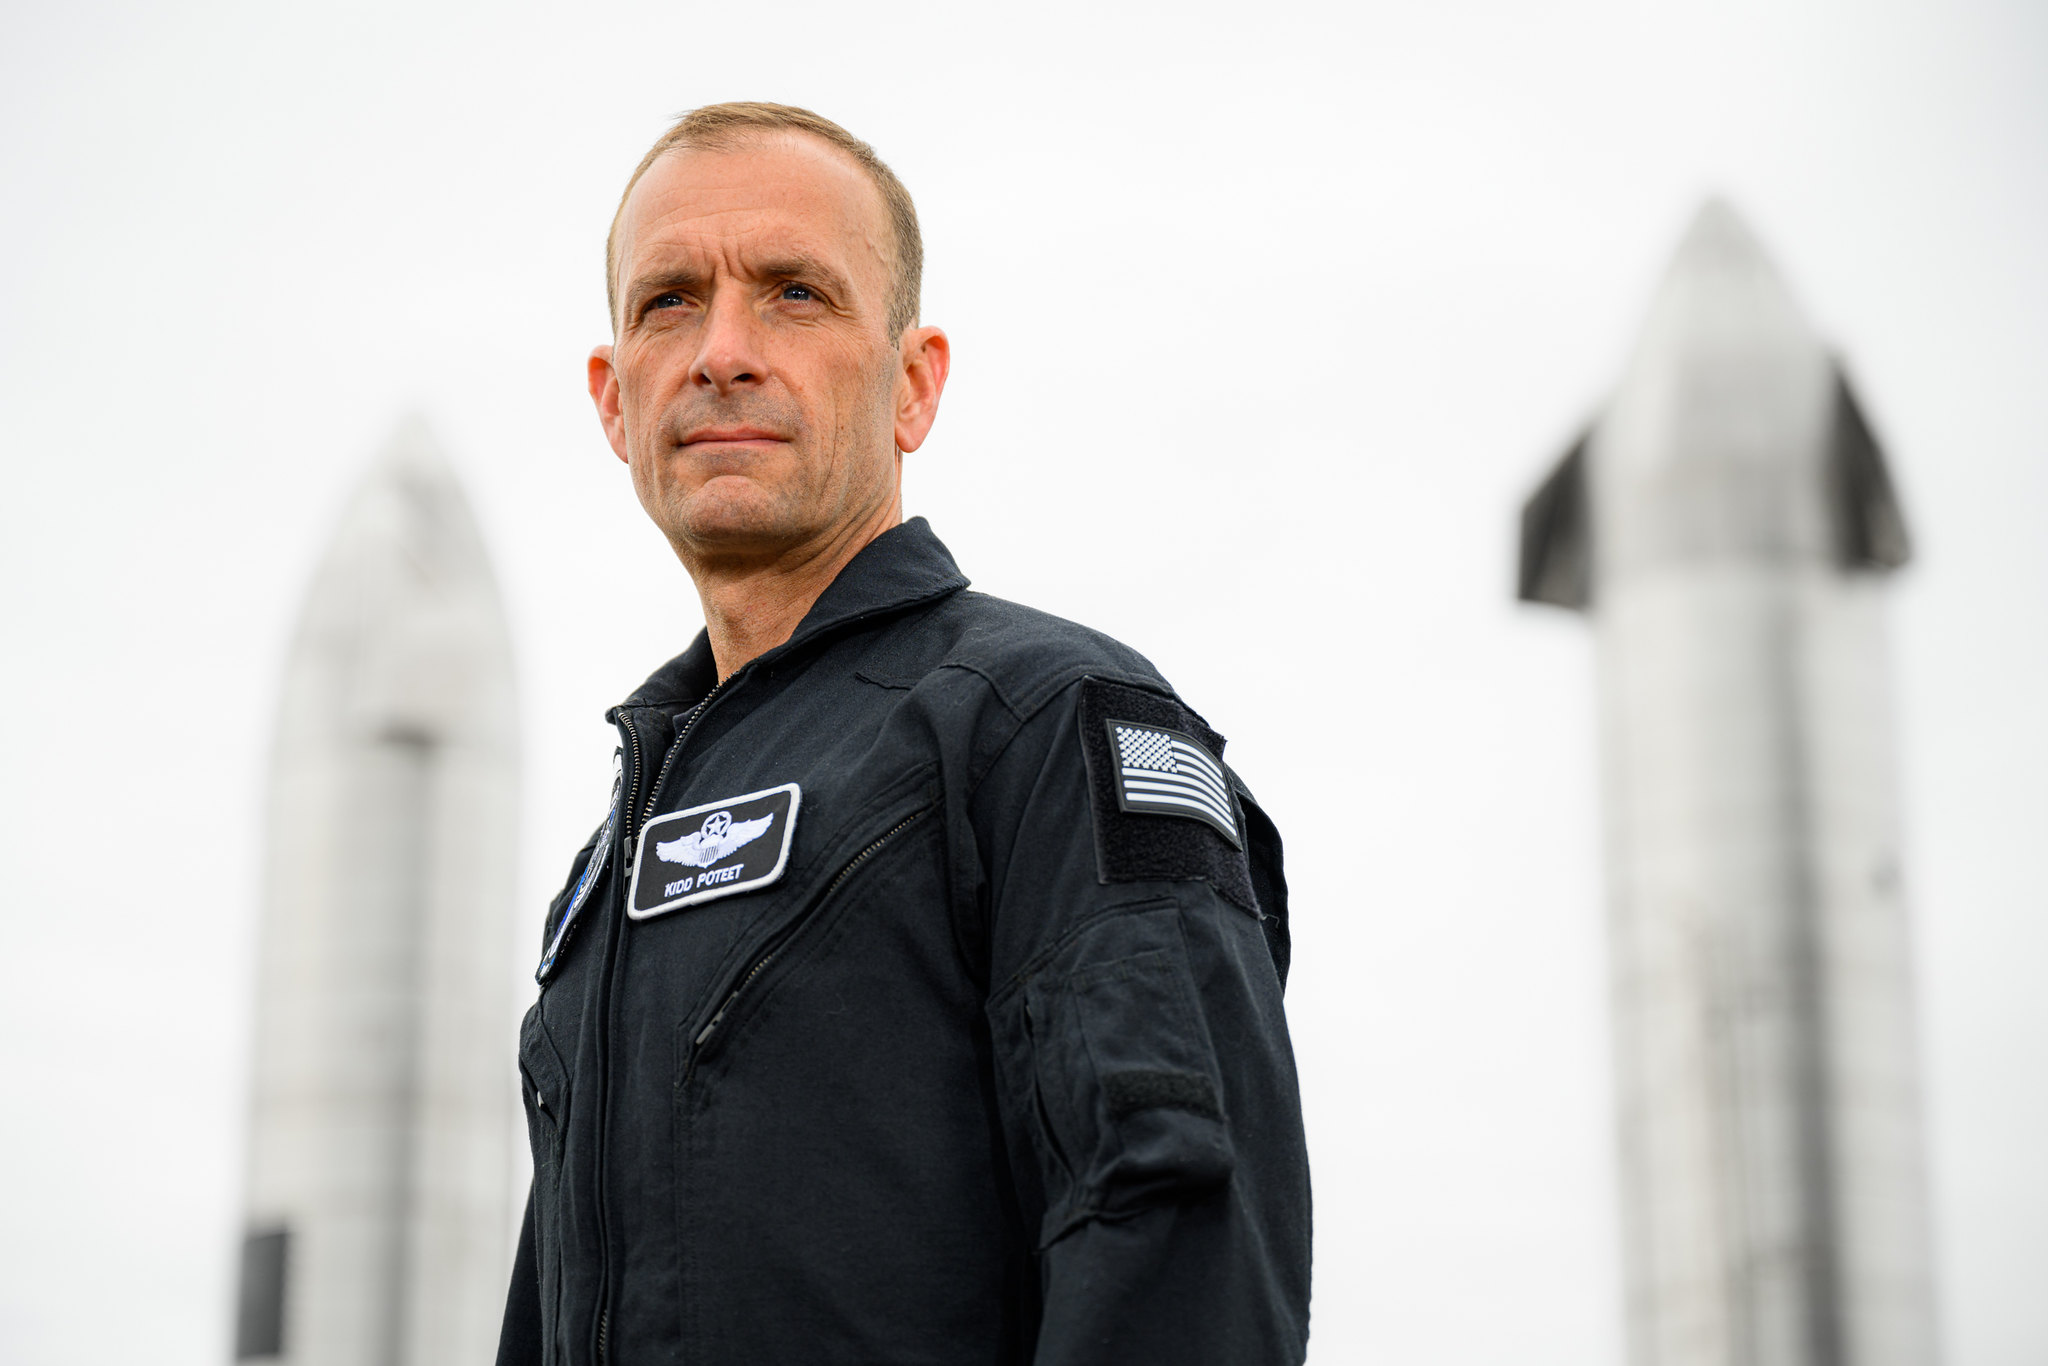 Scott Poteet, a retired U.S. Air Force colonel and former Thunderbird pilot, will serve as mission pilot for the Polaris Dawn SpaceX mission in late 2022.